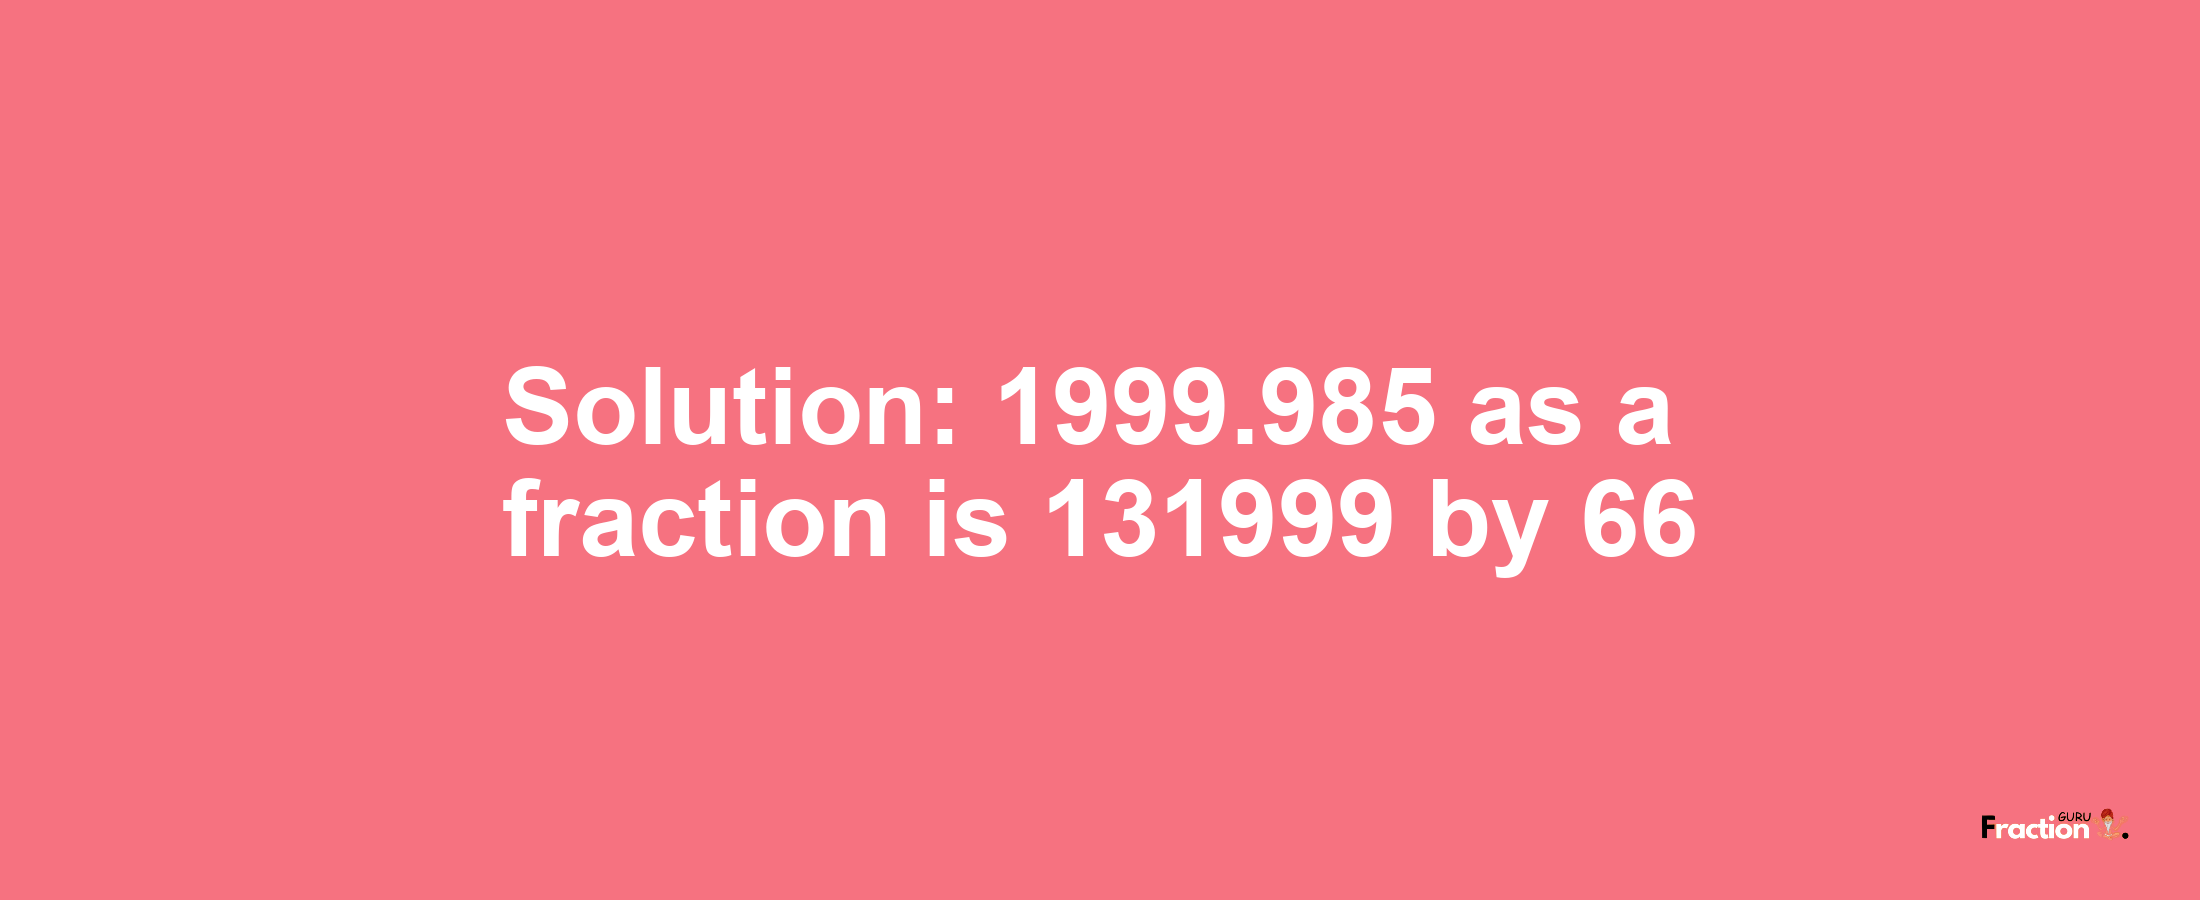 Solution:1999.985 as a fraction is 131999/66